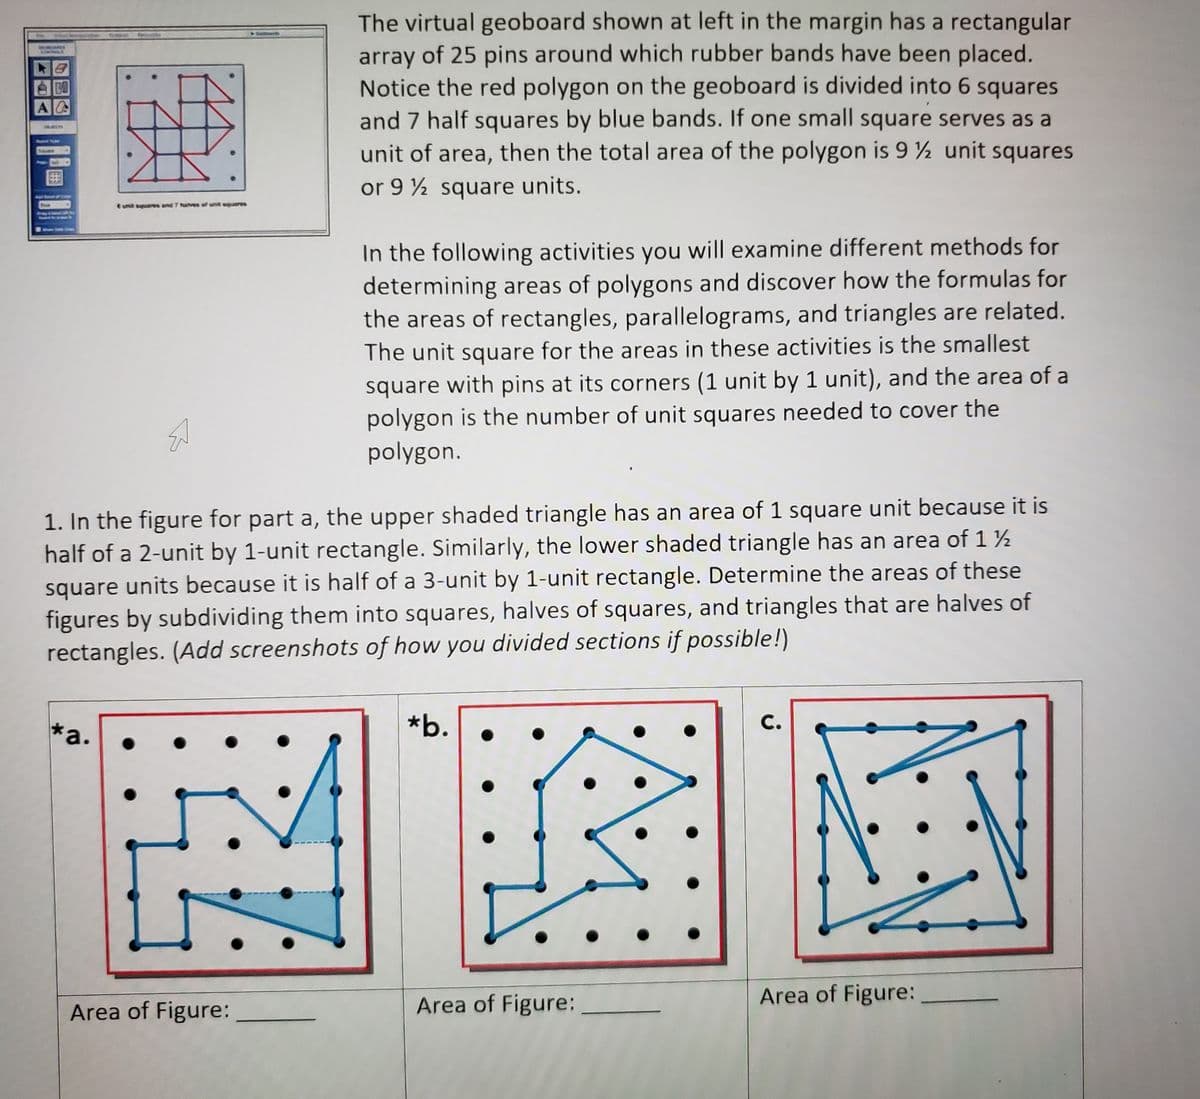 The virtual geoboard shown at left in the margin has a rectangular
array of 25 pins around which rubber bands have been placed.
Notice the red polygon on the geoboard is divided into 6 squares
and 7 half squares by blue bands. If one small square serves as a
unit of area, then the total area of the polygon is 9 ½ unit squares
COMICA
A
Rasia Rarey
Souen
or 9 ½ square units.
ANGRRR &f
E umit squares and 7 have of unil equares
In the following activities you will examine different methods for
determining areas of polygons and discover how the formulas for
the areas of rectangles, parallelograms, and triangles are related.
The unit square for the areas in these activities is the smallest
square with pins at its corners (1 unit by 1 unit), and the area of a
polygon is the number of unit squares needed to cover the
polygon.
1. In the figure for part a, the upper shaded triangle has an area of 1 square unit because it is
half of a 2-unit by 1-unit rectangle. Similarly, the lower shaded triangle has an area of 1 ½
square units because it is half of a 3-unit by 1-unit rectangle. Determine the areas of these
figures by subdividing them into squares, halves of squares, and triangles that are halves of
rectangles. (Add screenshots of how you divided sections if possible!)
*a.
*b.
С.
Area of Figure:
Area of Figure:
Area of Figure:
